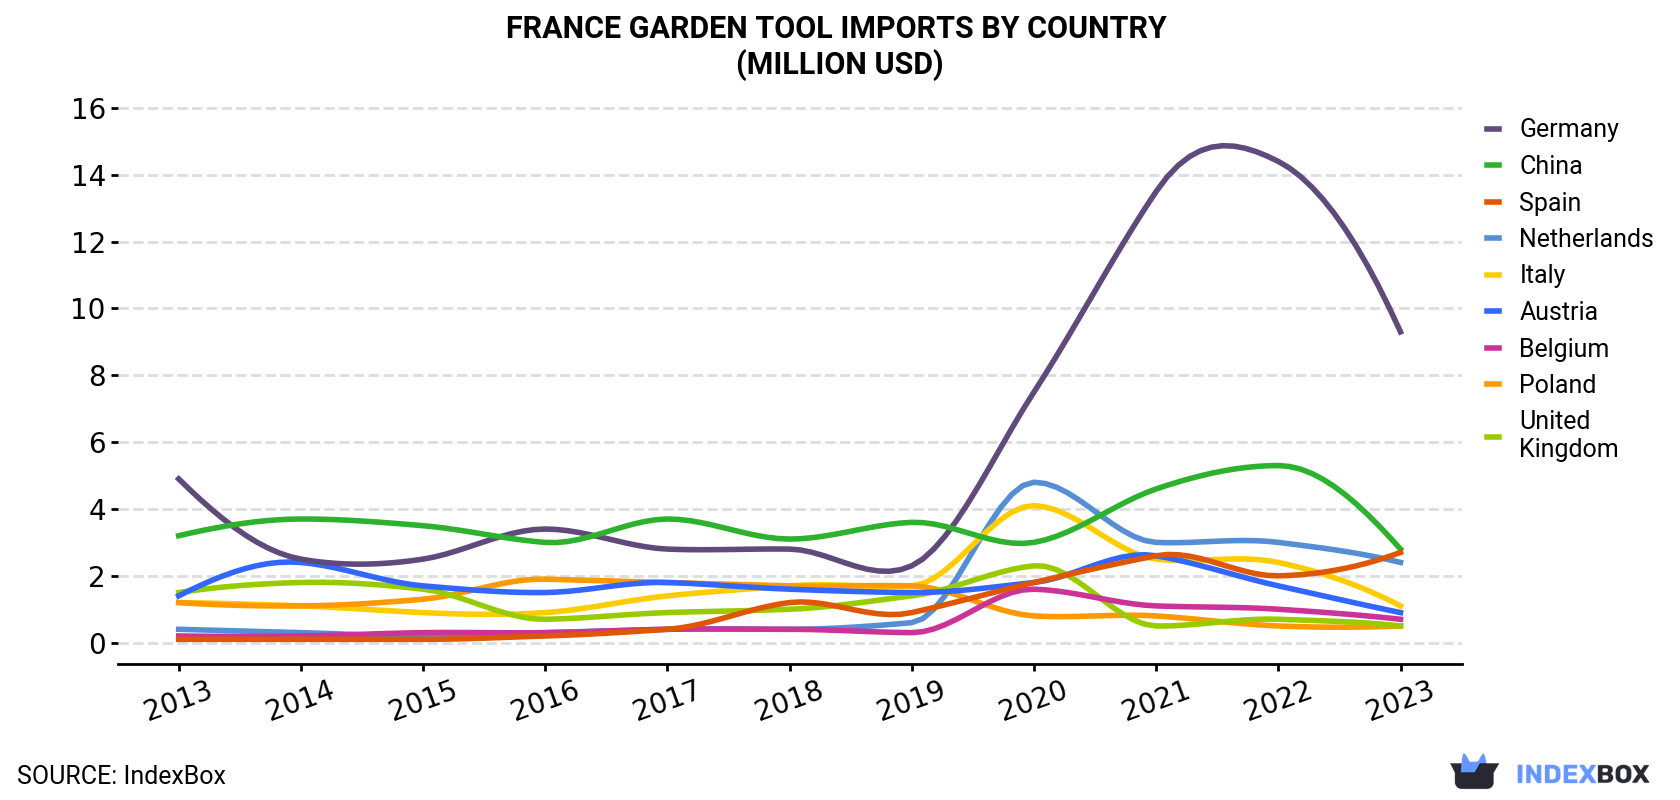 France Garden Tool Imports By Country (Million USD)